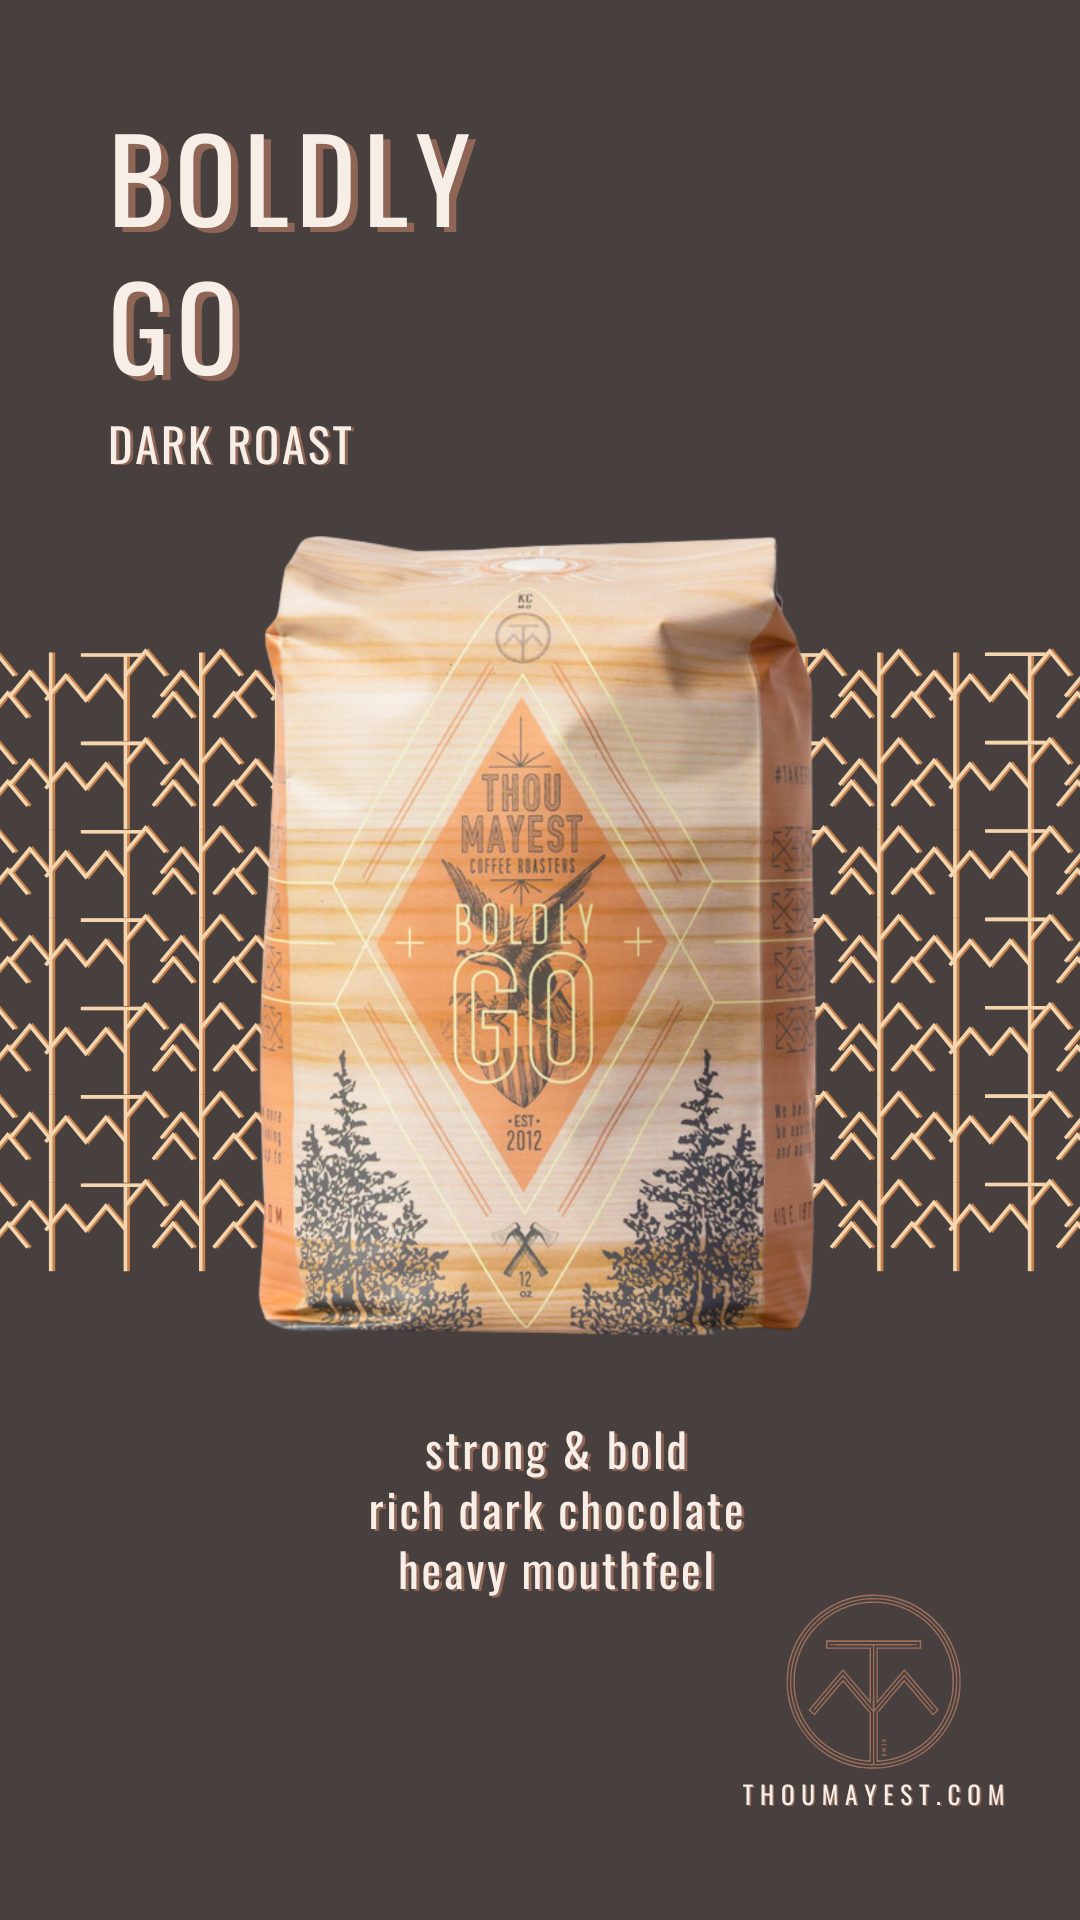 Image of Boldly Go 12oz bag of coffee with description: Dark roast. Strong & Bold. Rich Dark Chocolate. Heavy Mouthfeel. 